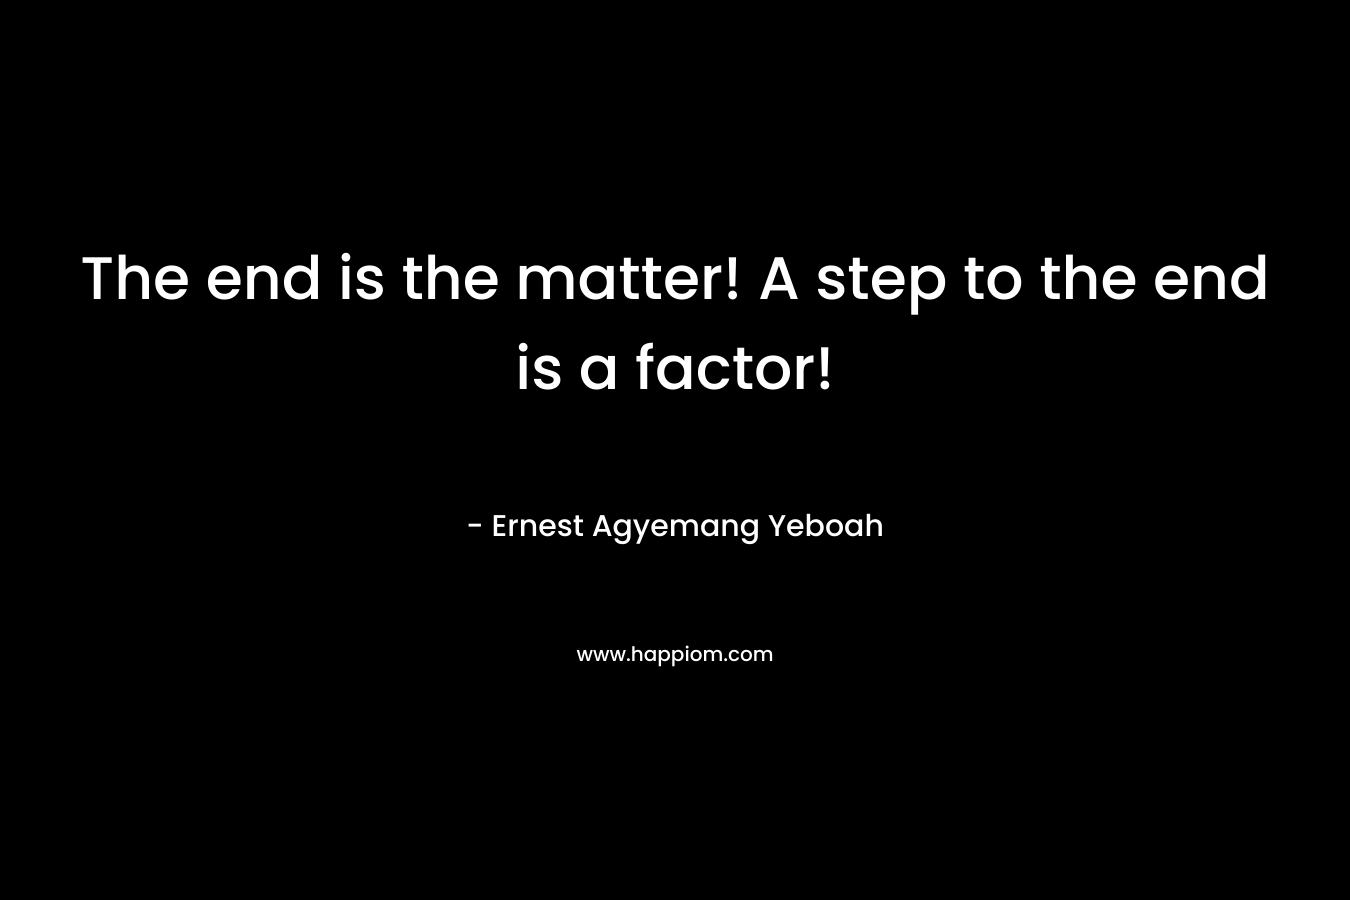 The end is the matter! A step to the end is a factor!